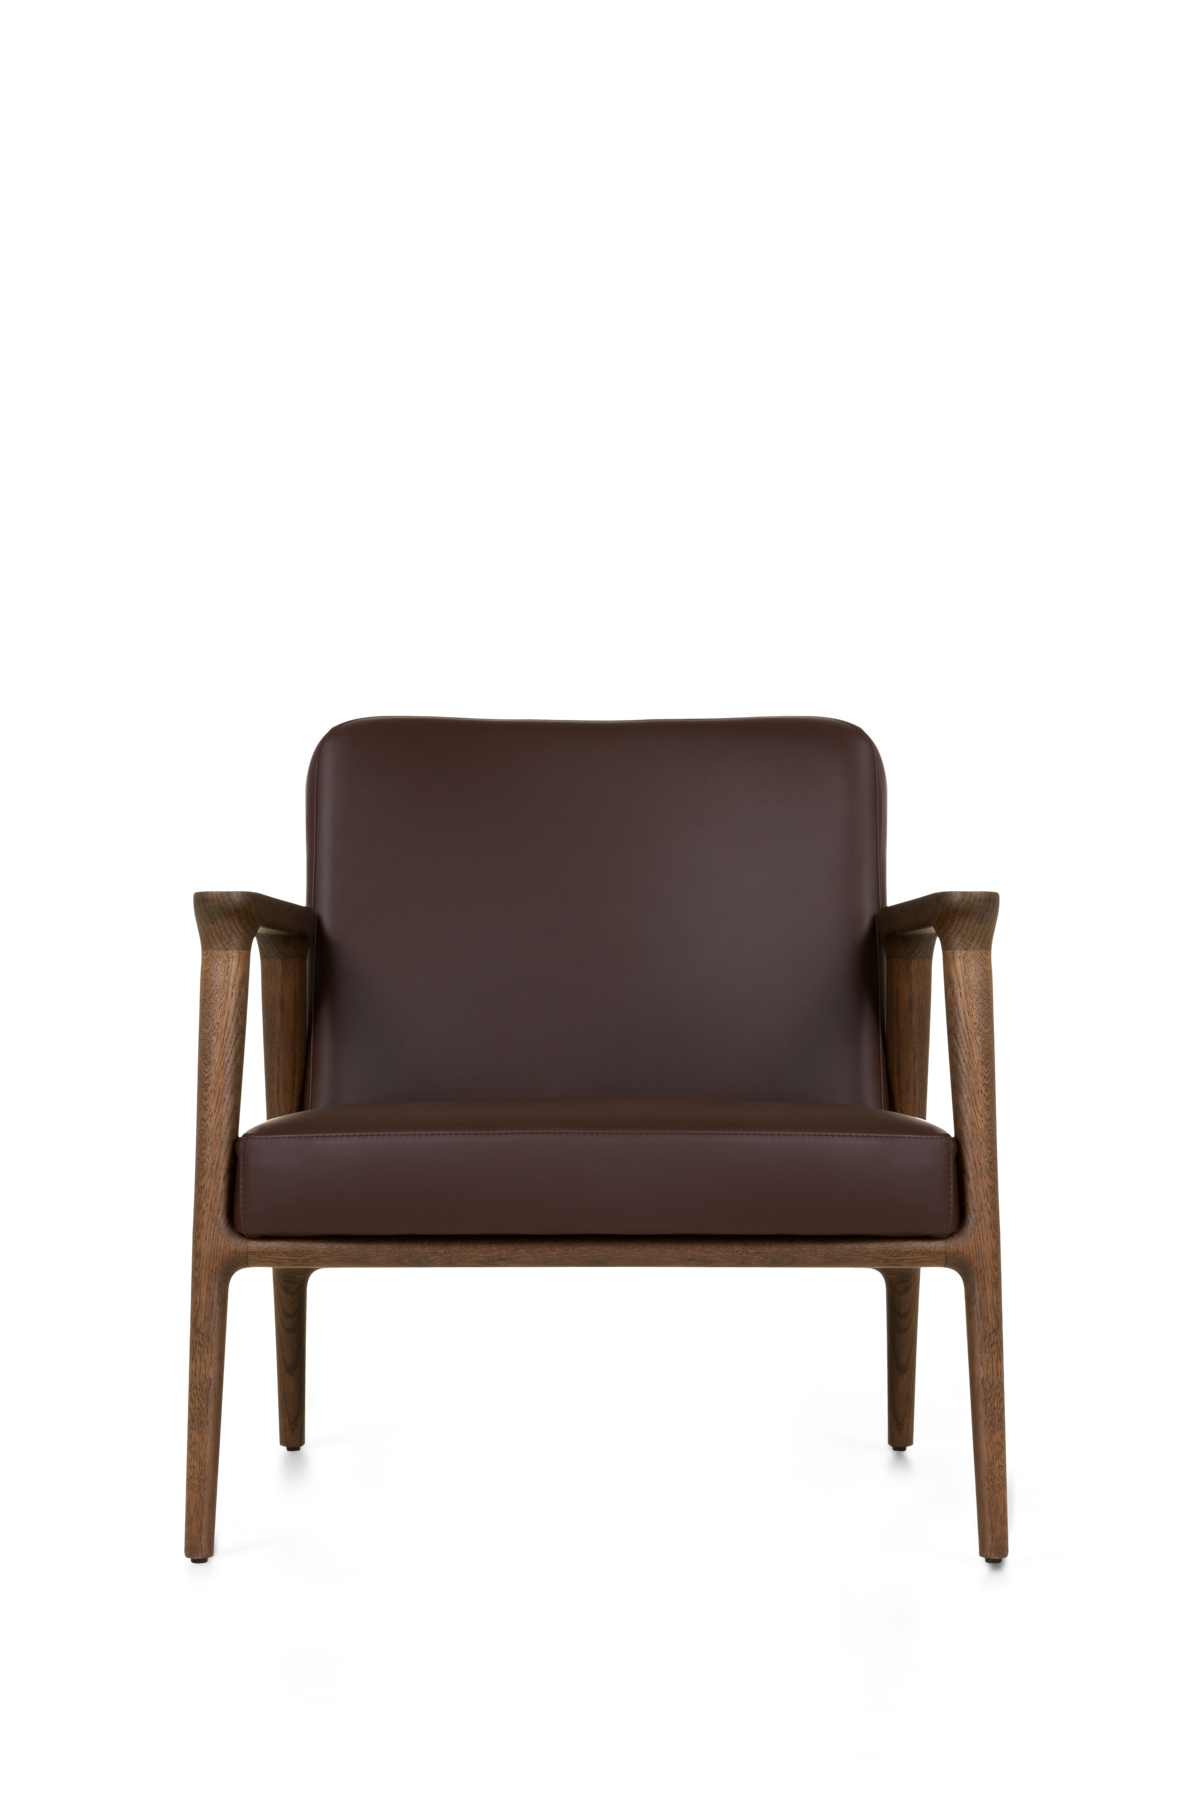 Zio Lounge Chair Spectrum brown with cinnamon legs front view